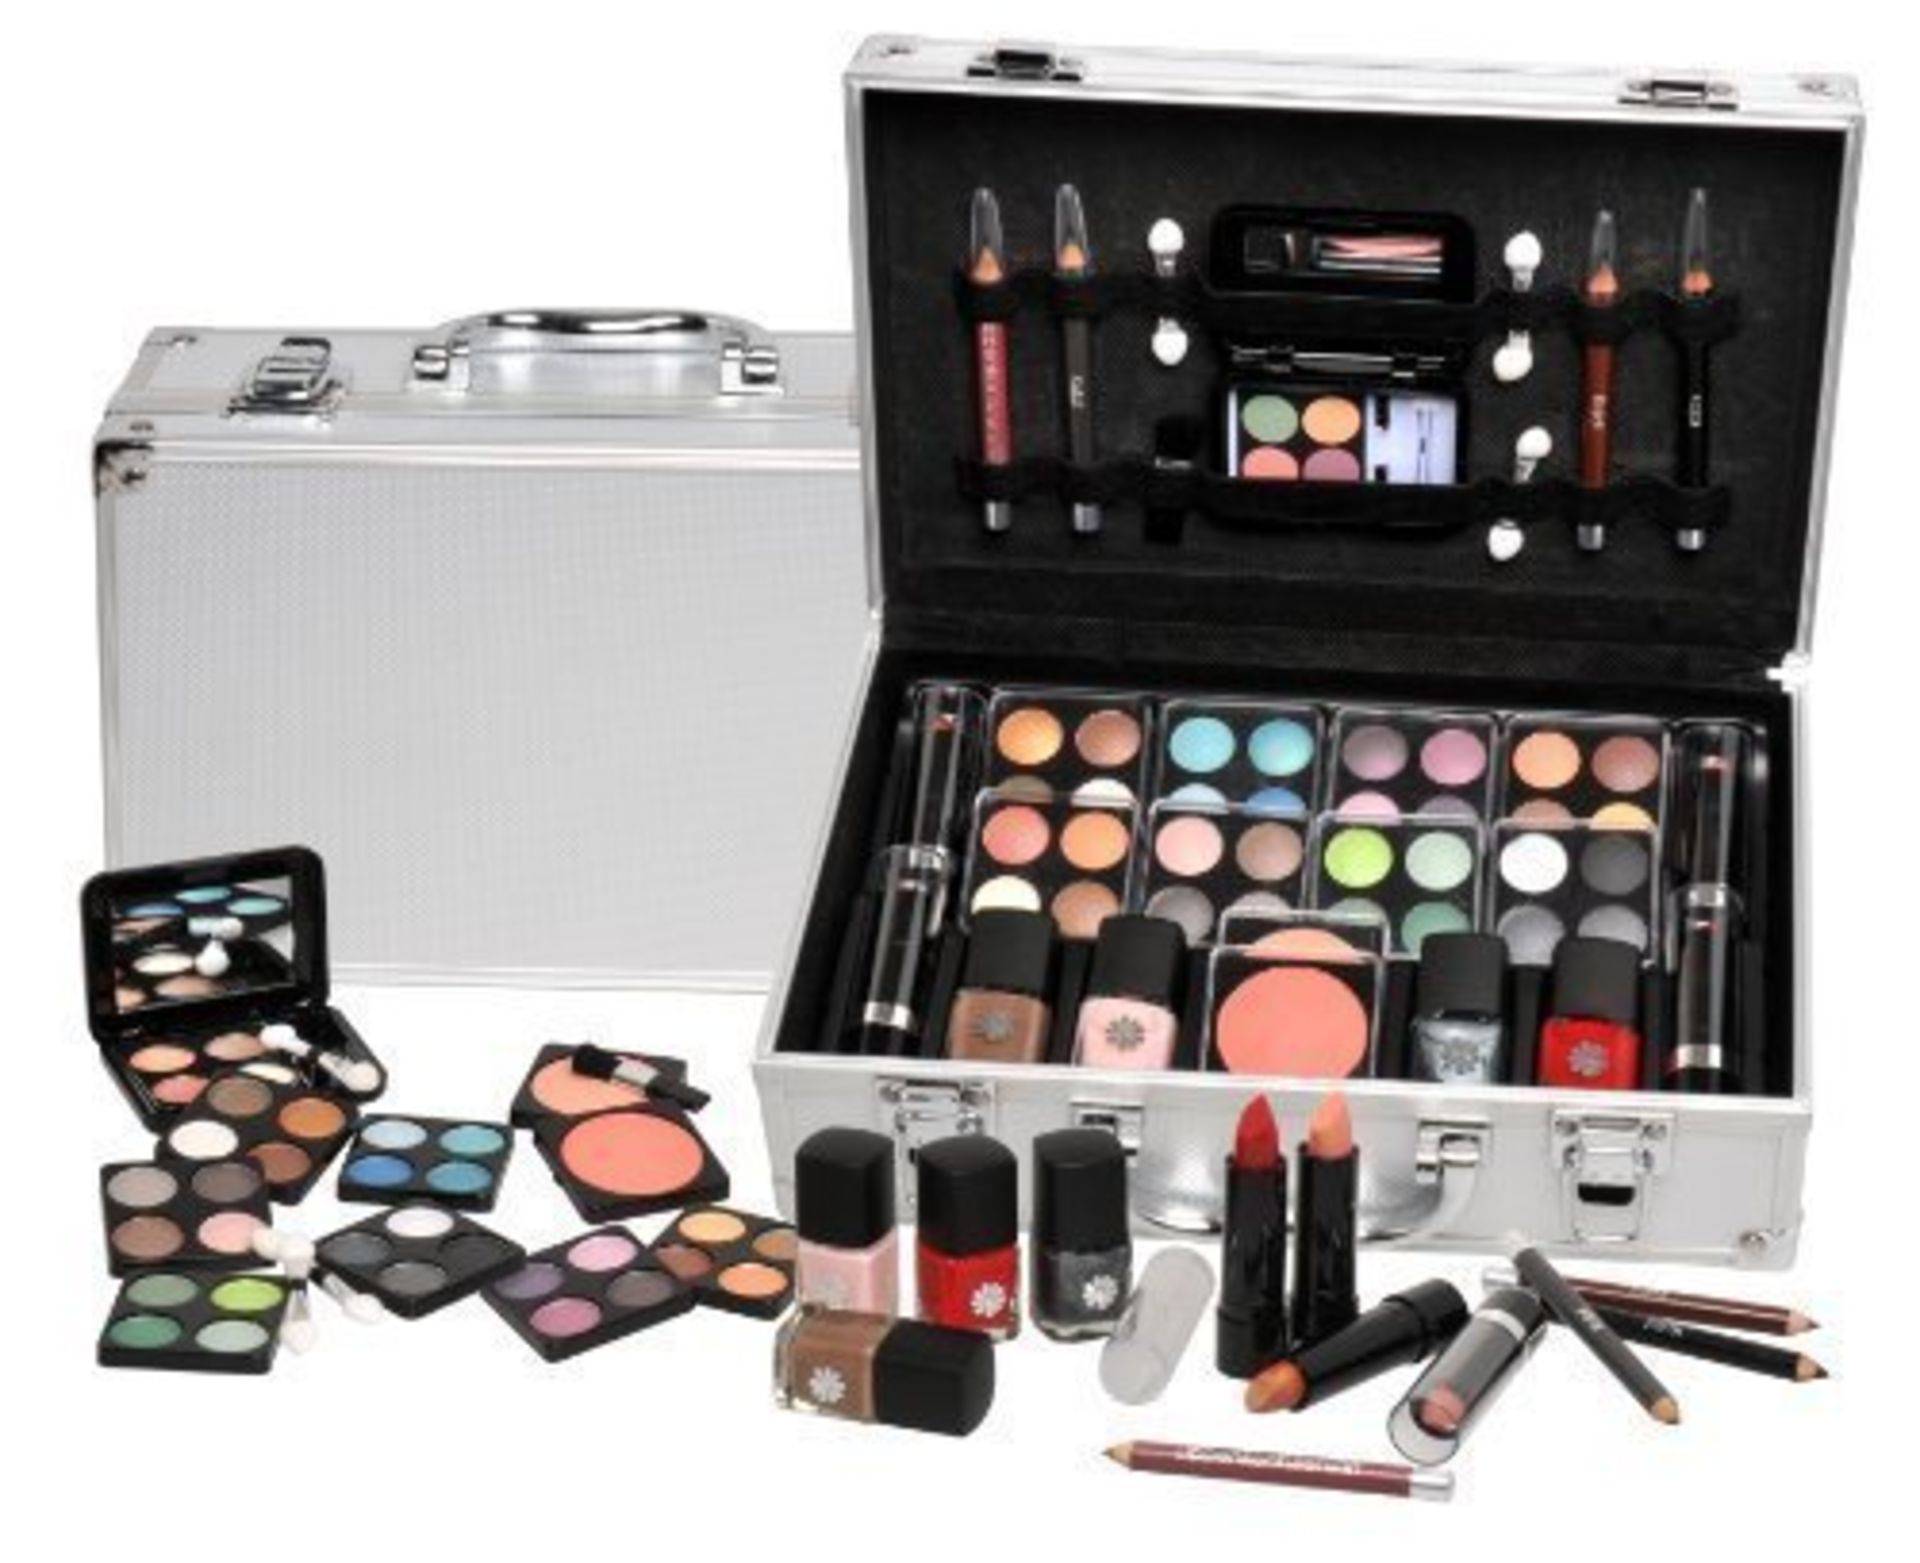 V Brand New Ladies 52 Piece Cosmetic Set In Aluminium Case X 2 YOUR BID PRICE TO BE MULTIPLIED BY